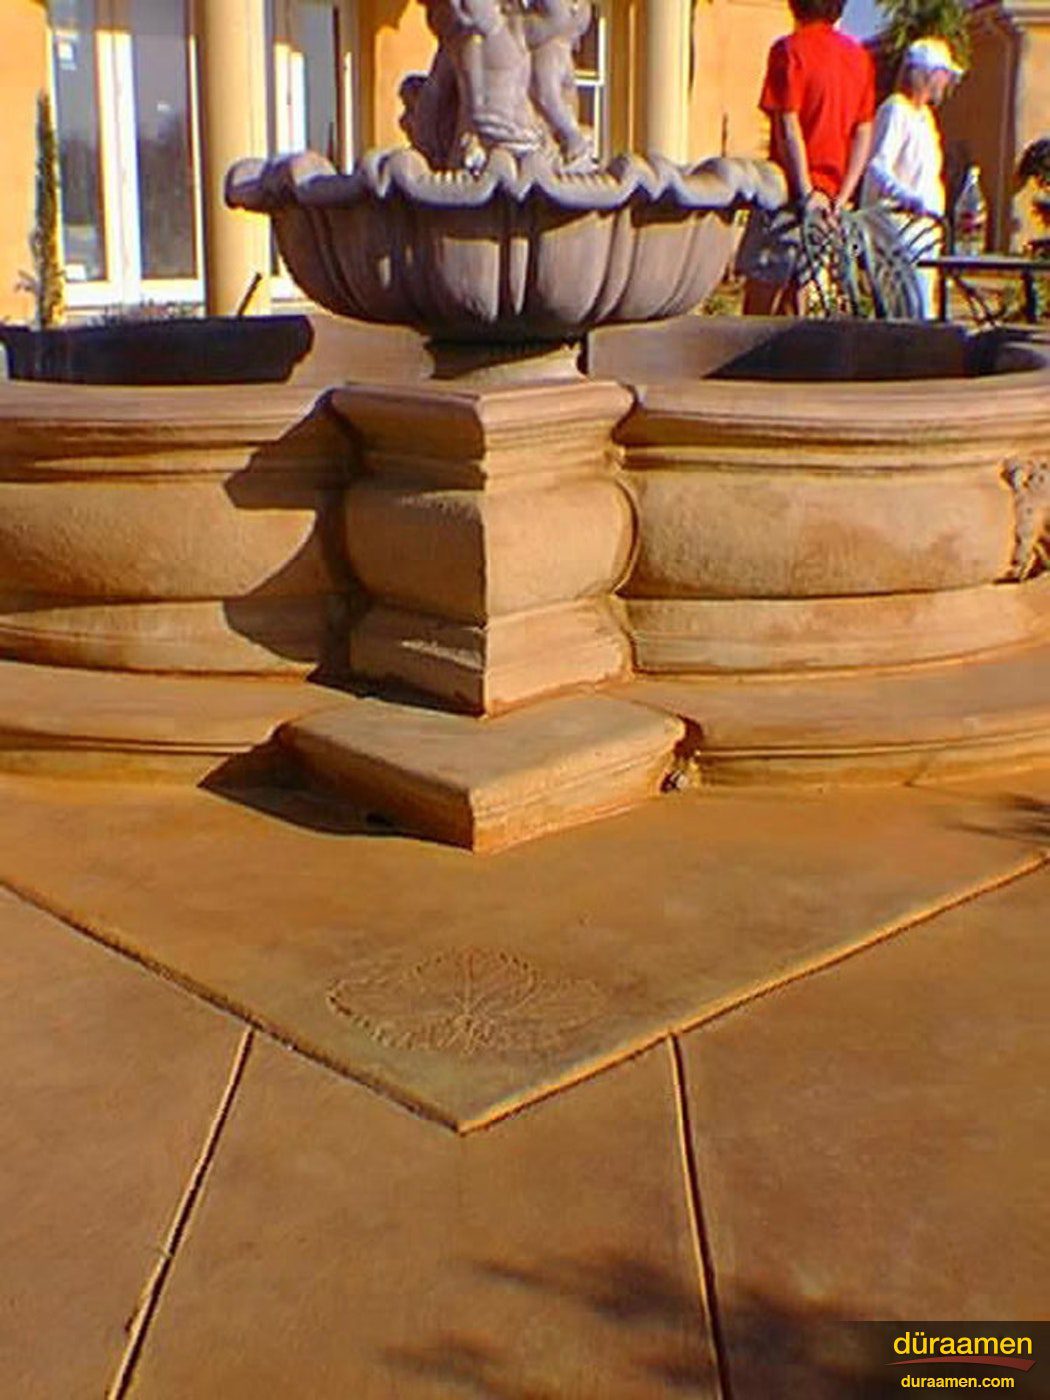 A detail photo of the fountain that was created with a decorative concrete overlay Exterior concrete fountain stained with water based stains | Duraamen Engineered Products Inc